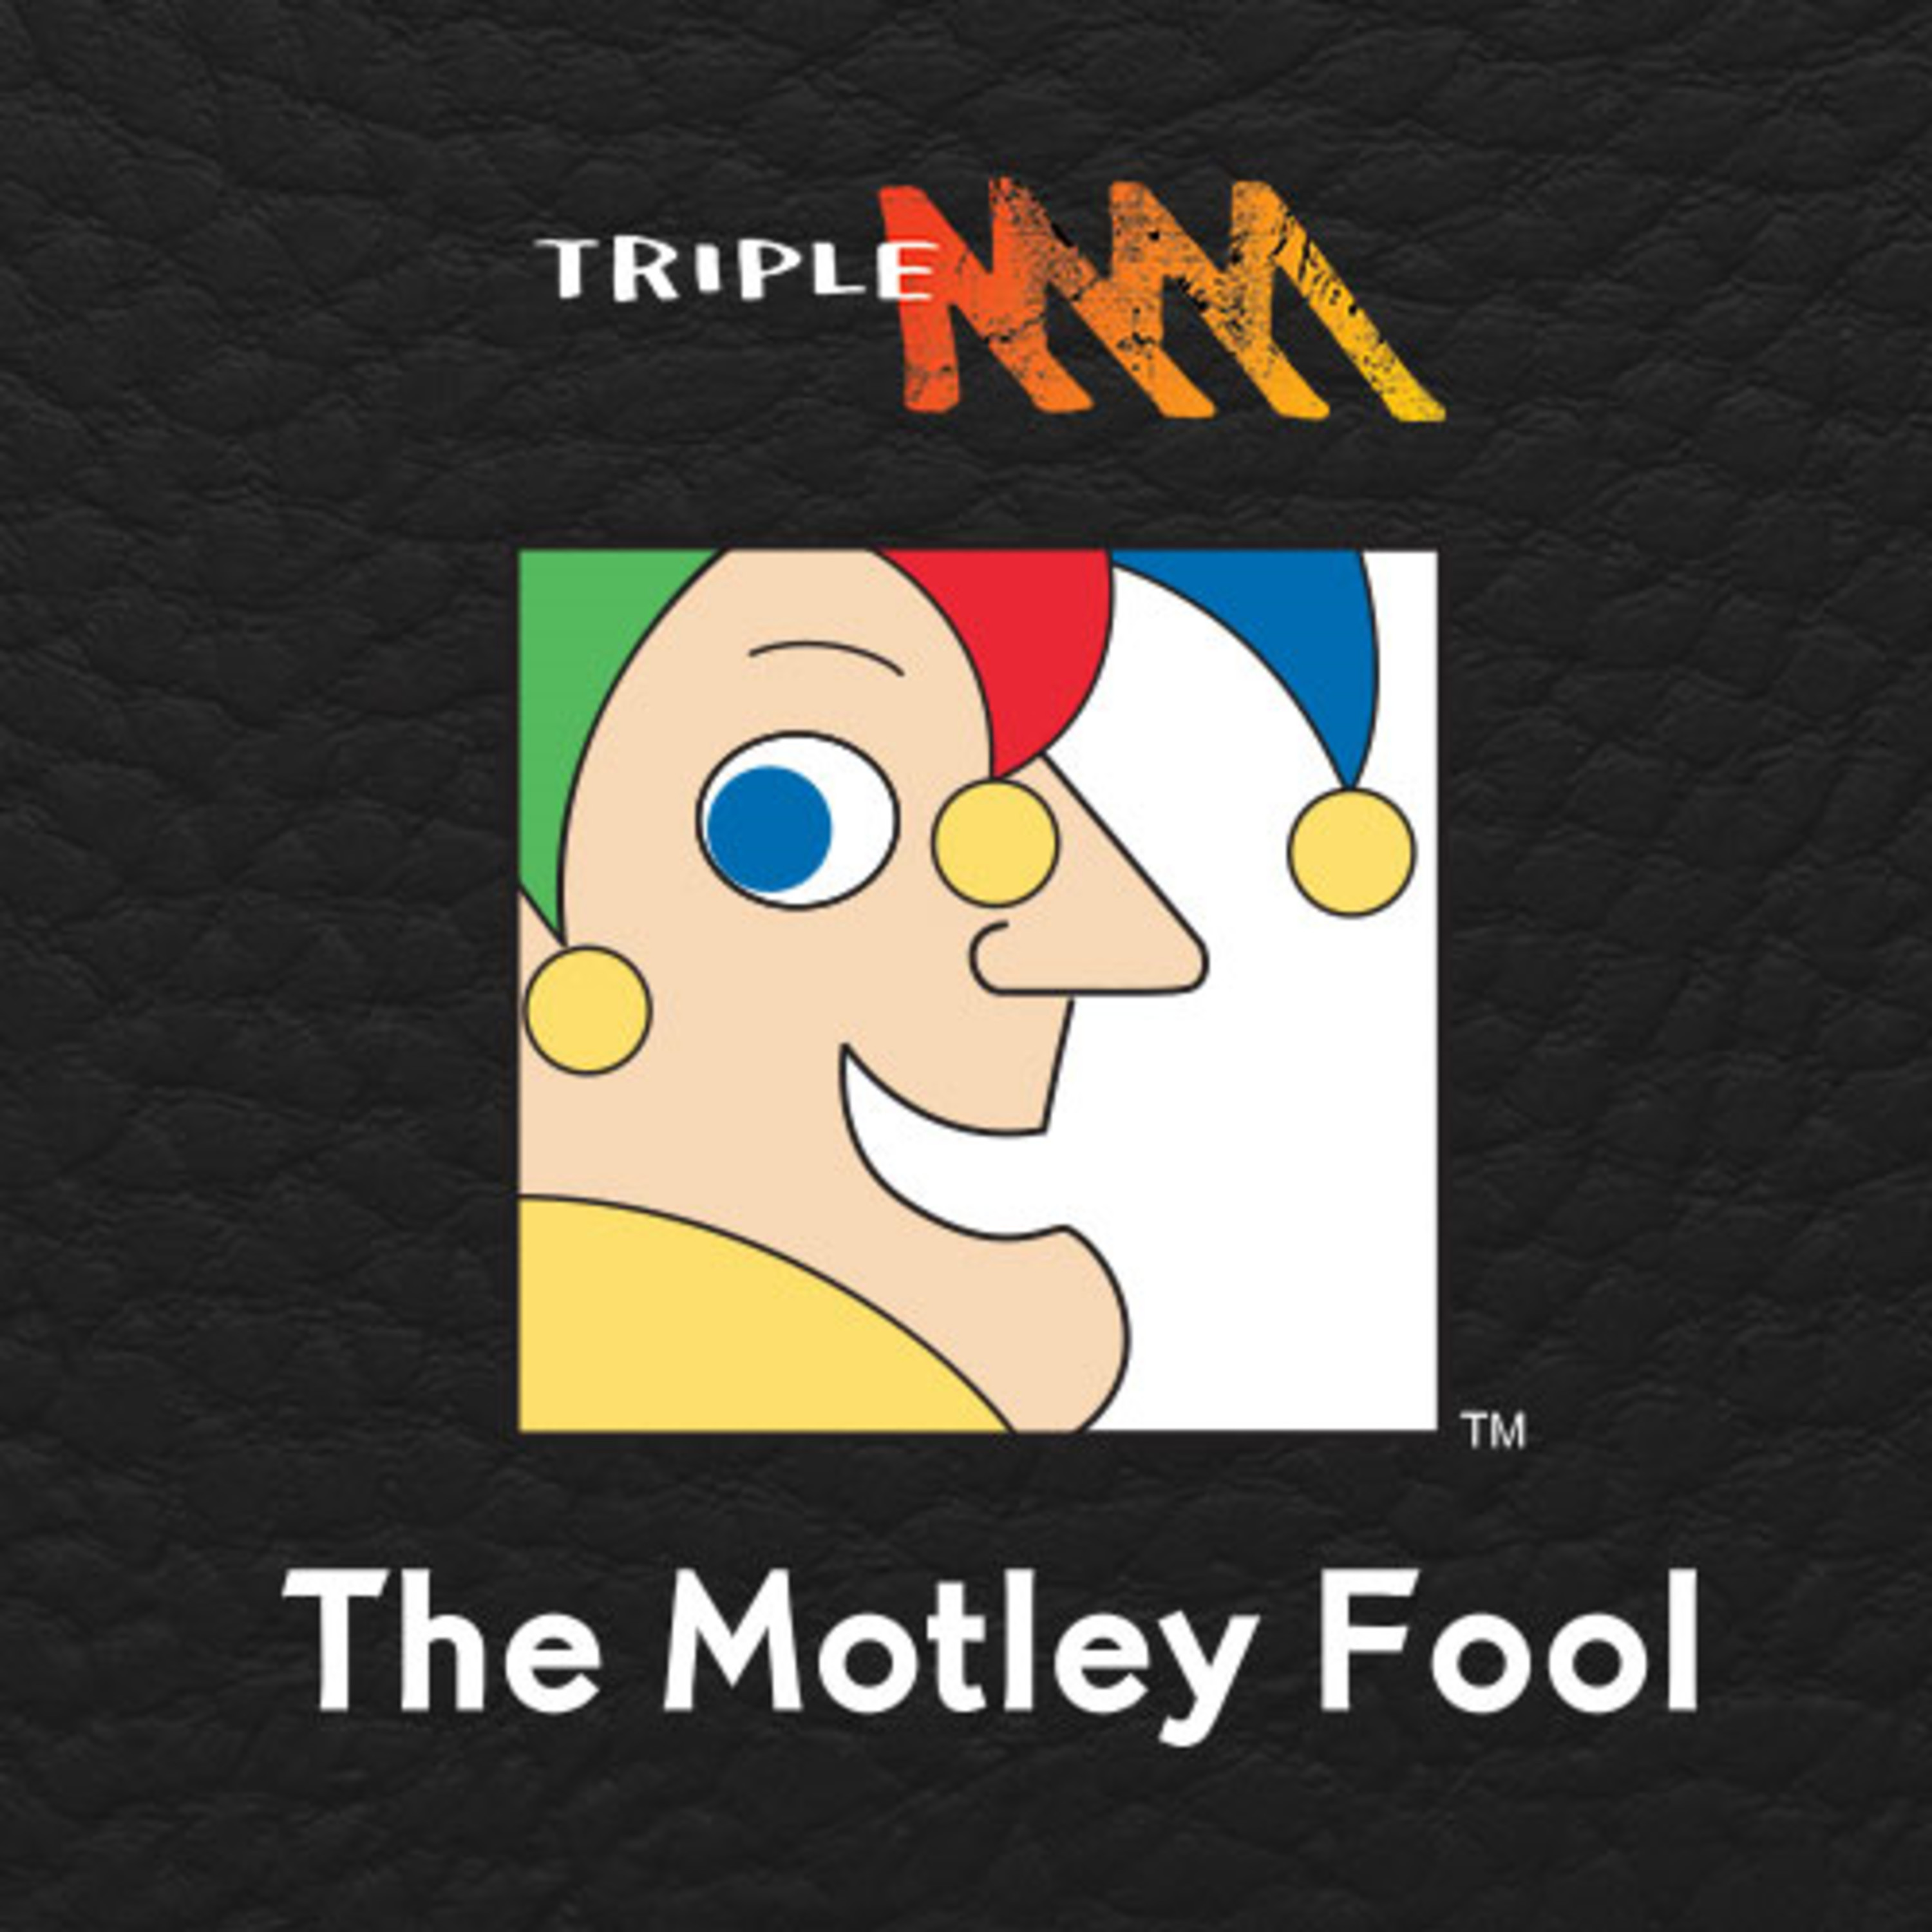 The Supersized Foolish Mailbag - Episode 152 May 10 - Triple M's Motley Fool Money